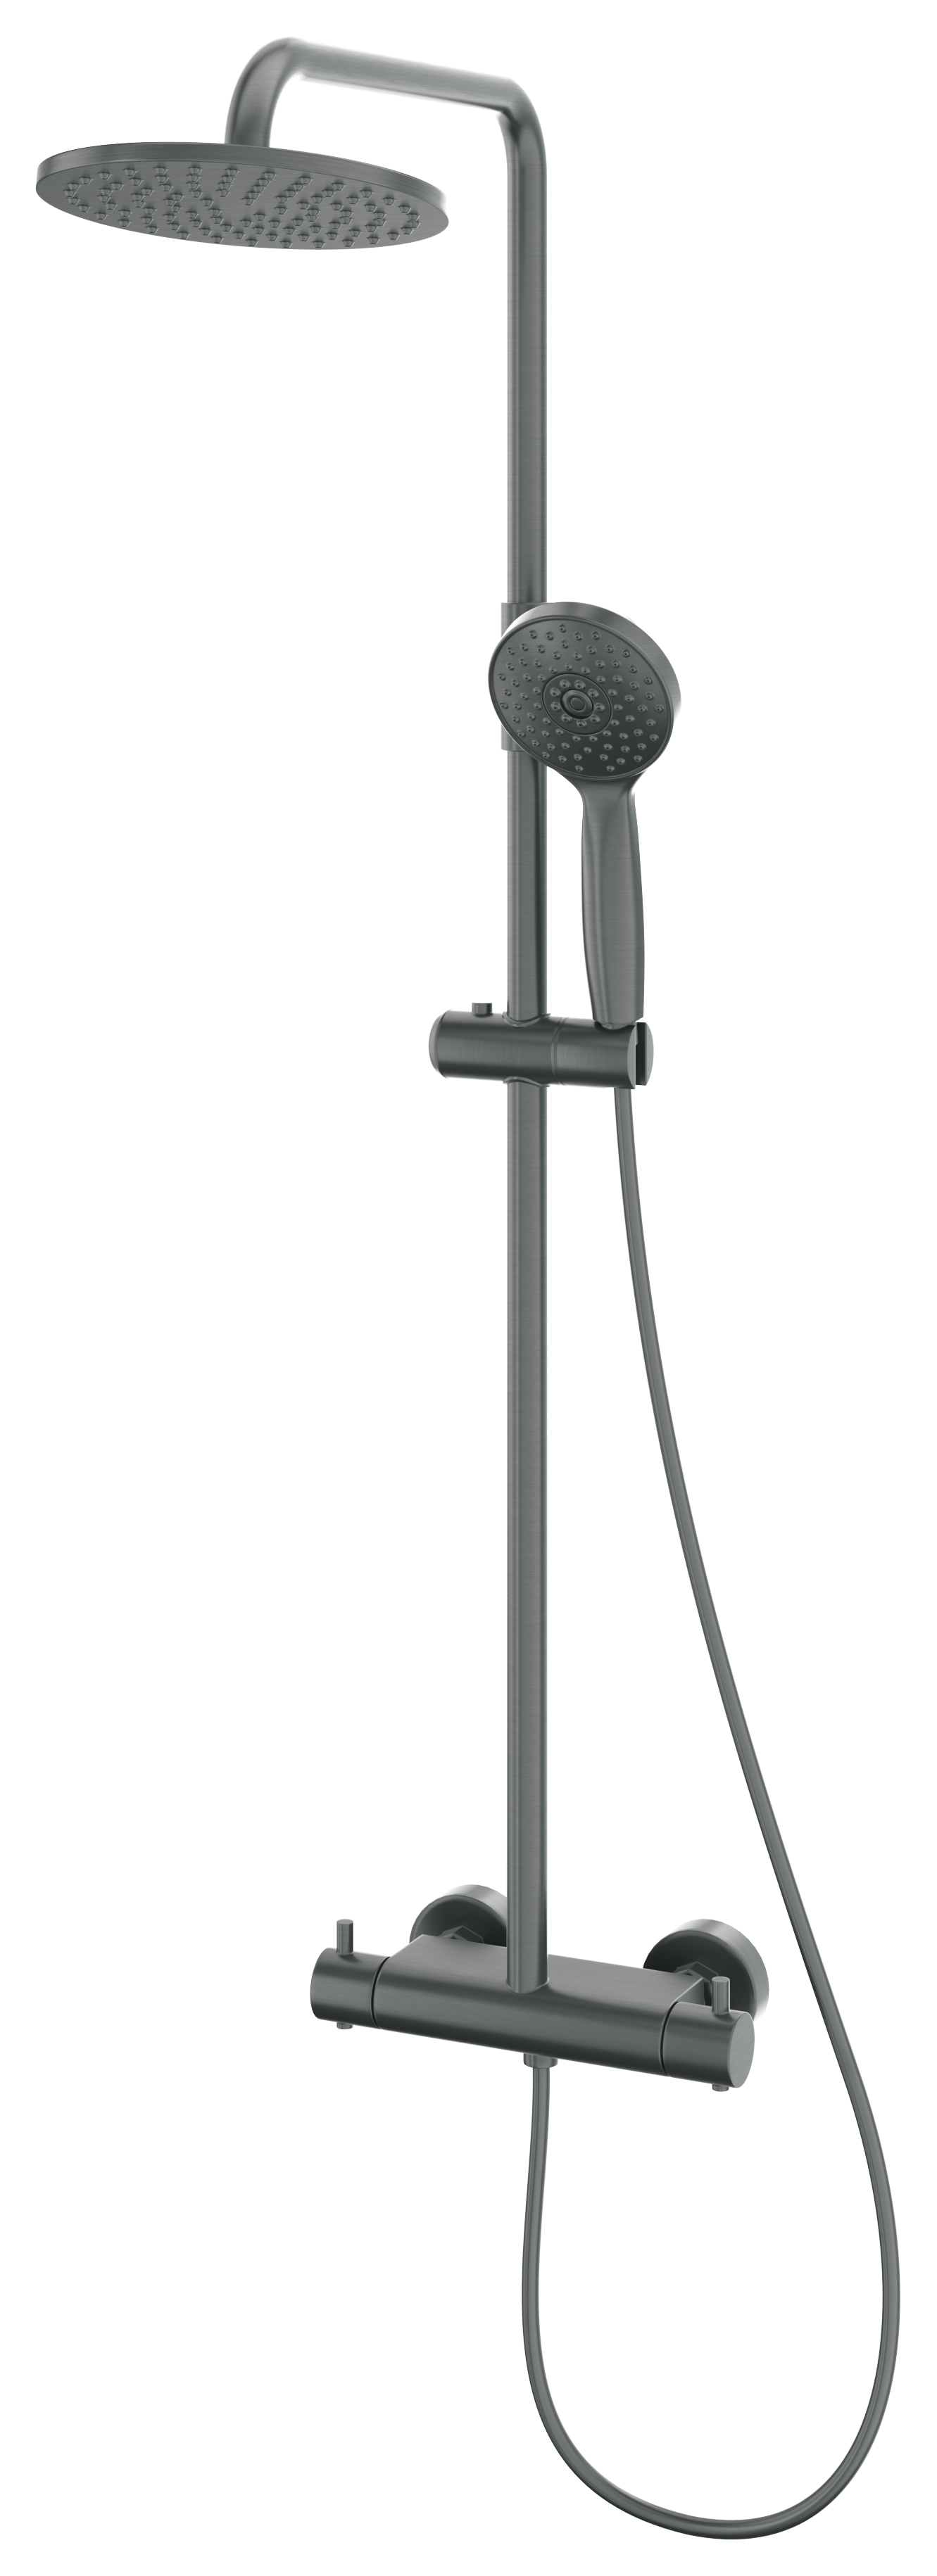 Image of Hadleigh Wall Mounted Dual Outlet Shower Mixer - Matt Anthracite